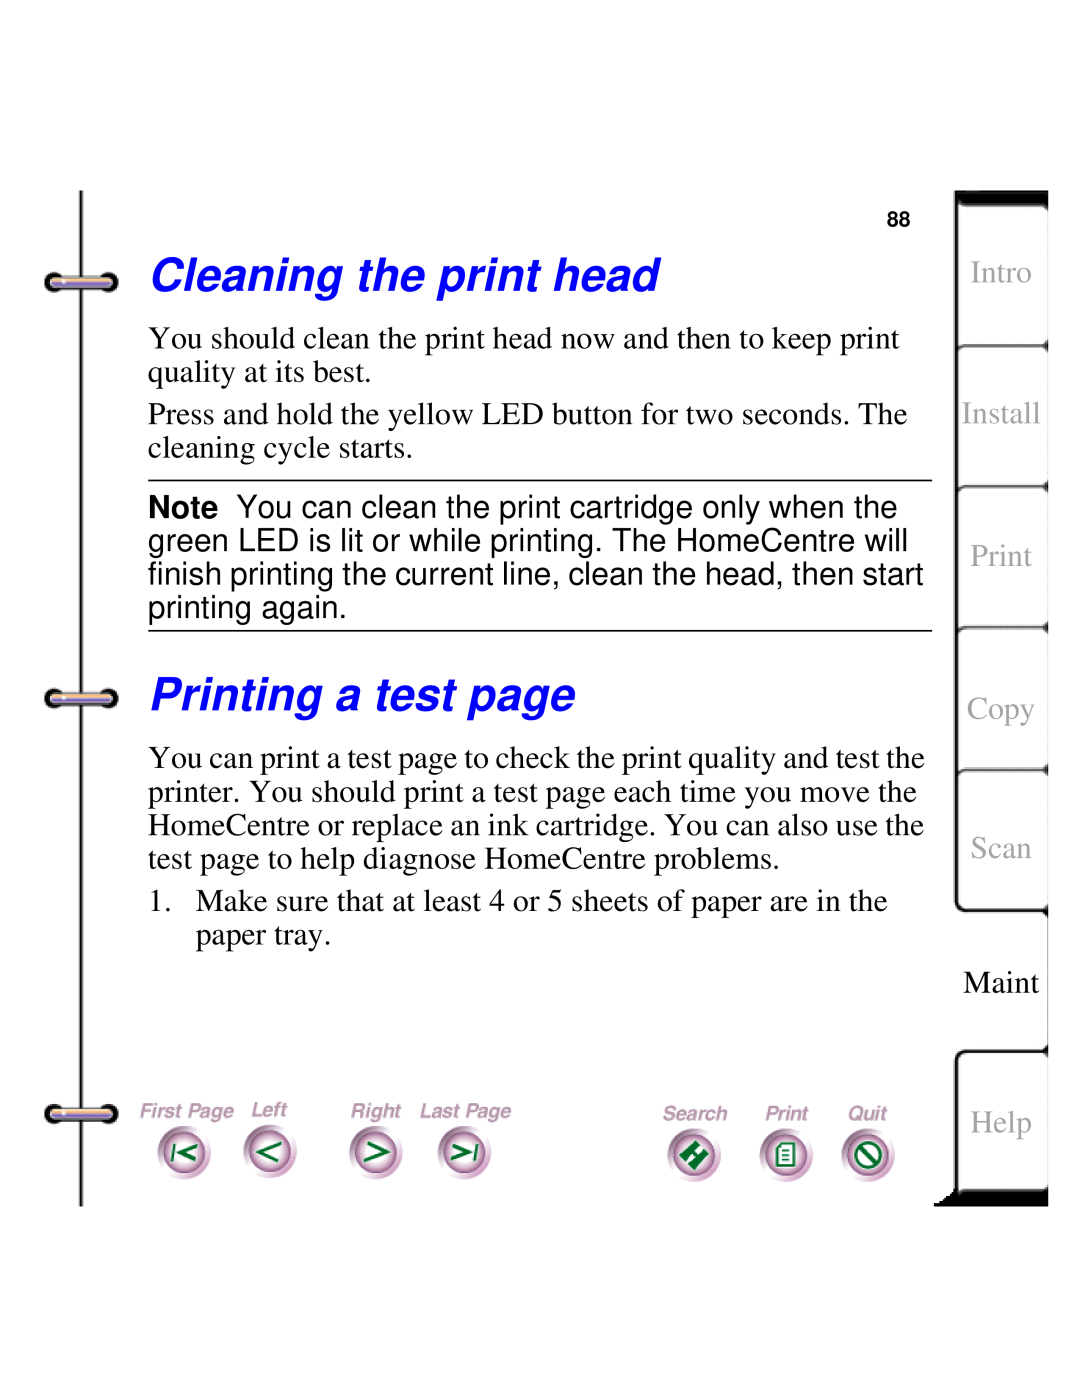 Xerox Document HomeCentre manual Cleaning the print head, Printing a test page, Intro Install Print Copy Scan, Help 